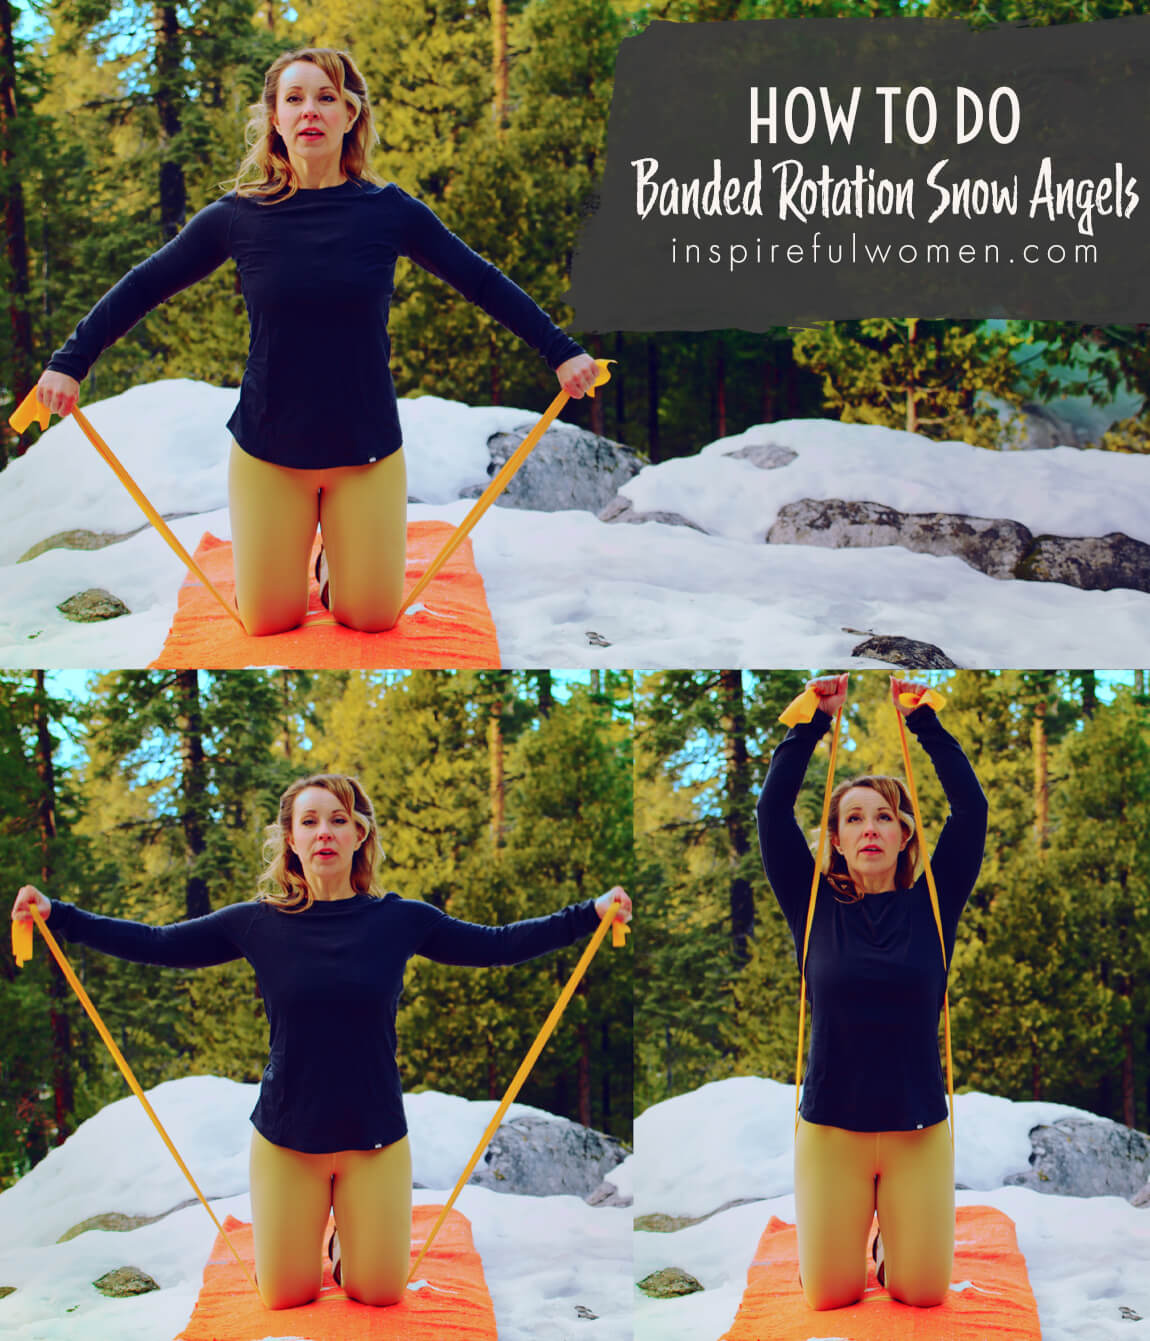 how-to-do-banded-rotation-snow-angels-resistance-band-shoulder-exercise-at-home-women-40-plus